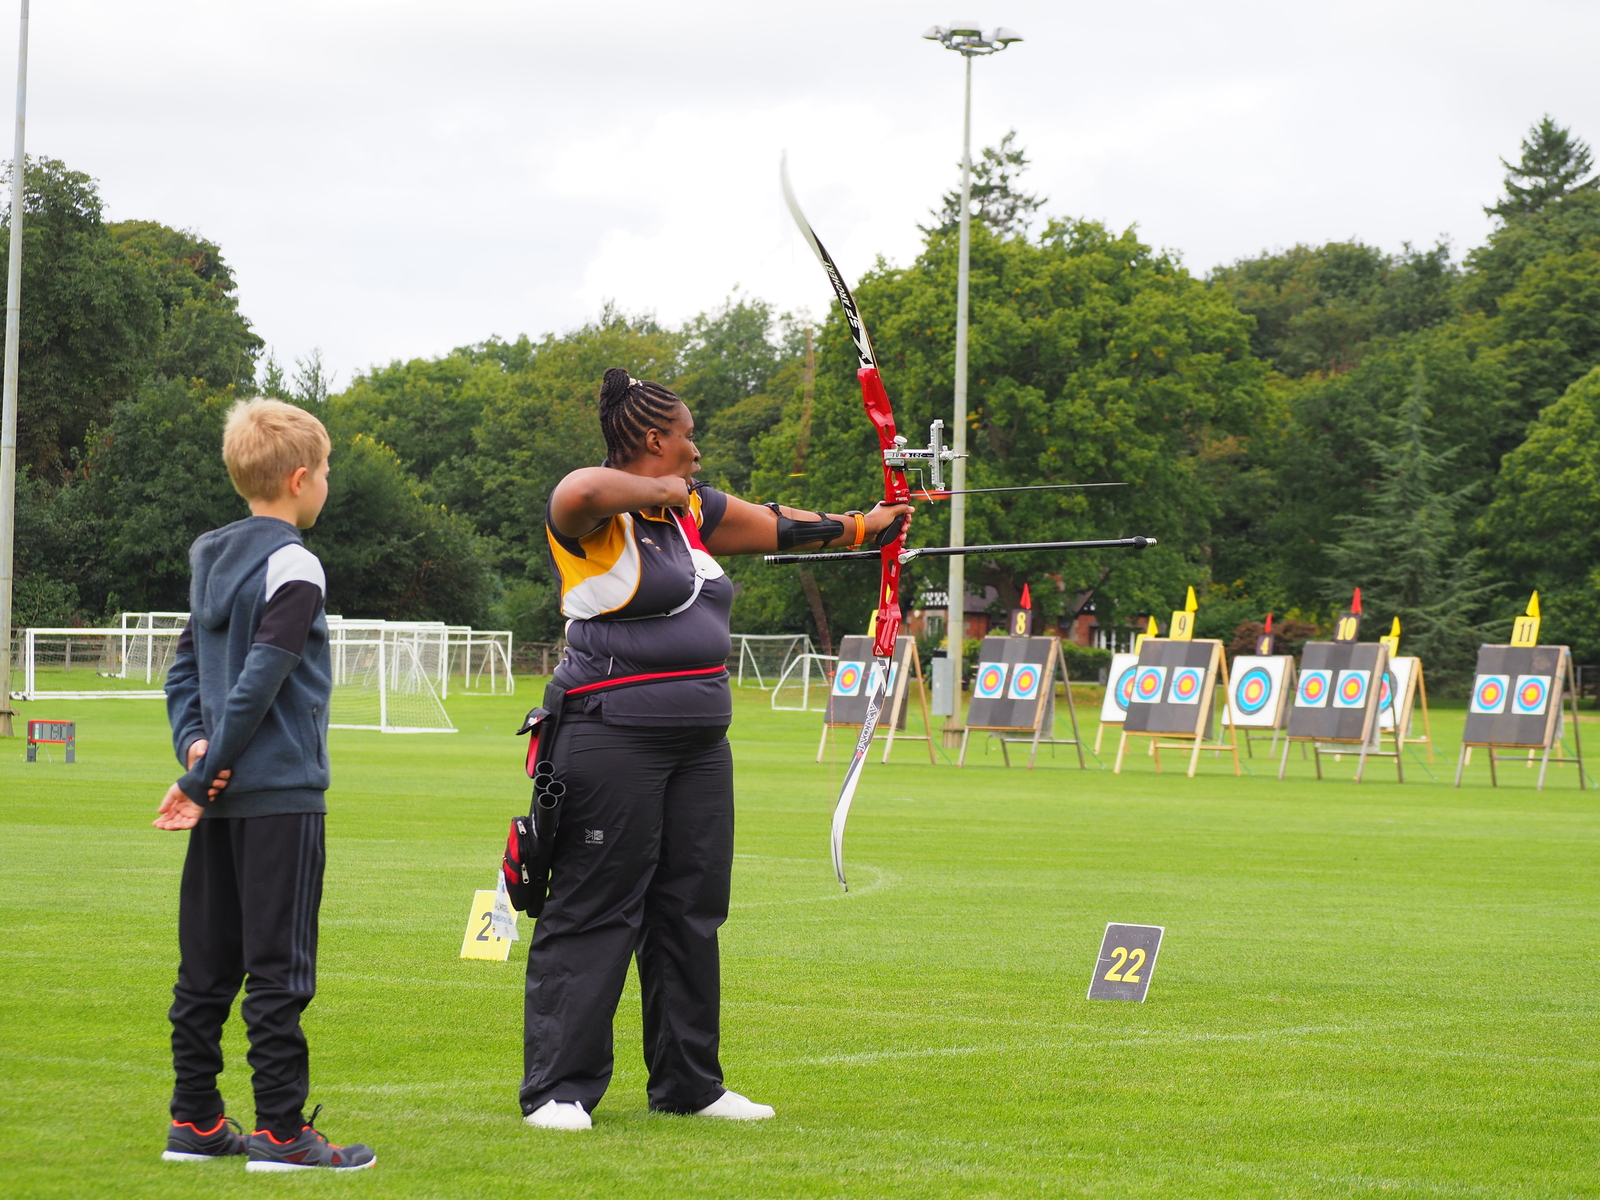 Archer at a disability archery competition